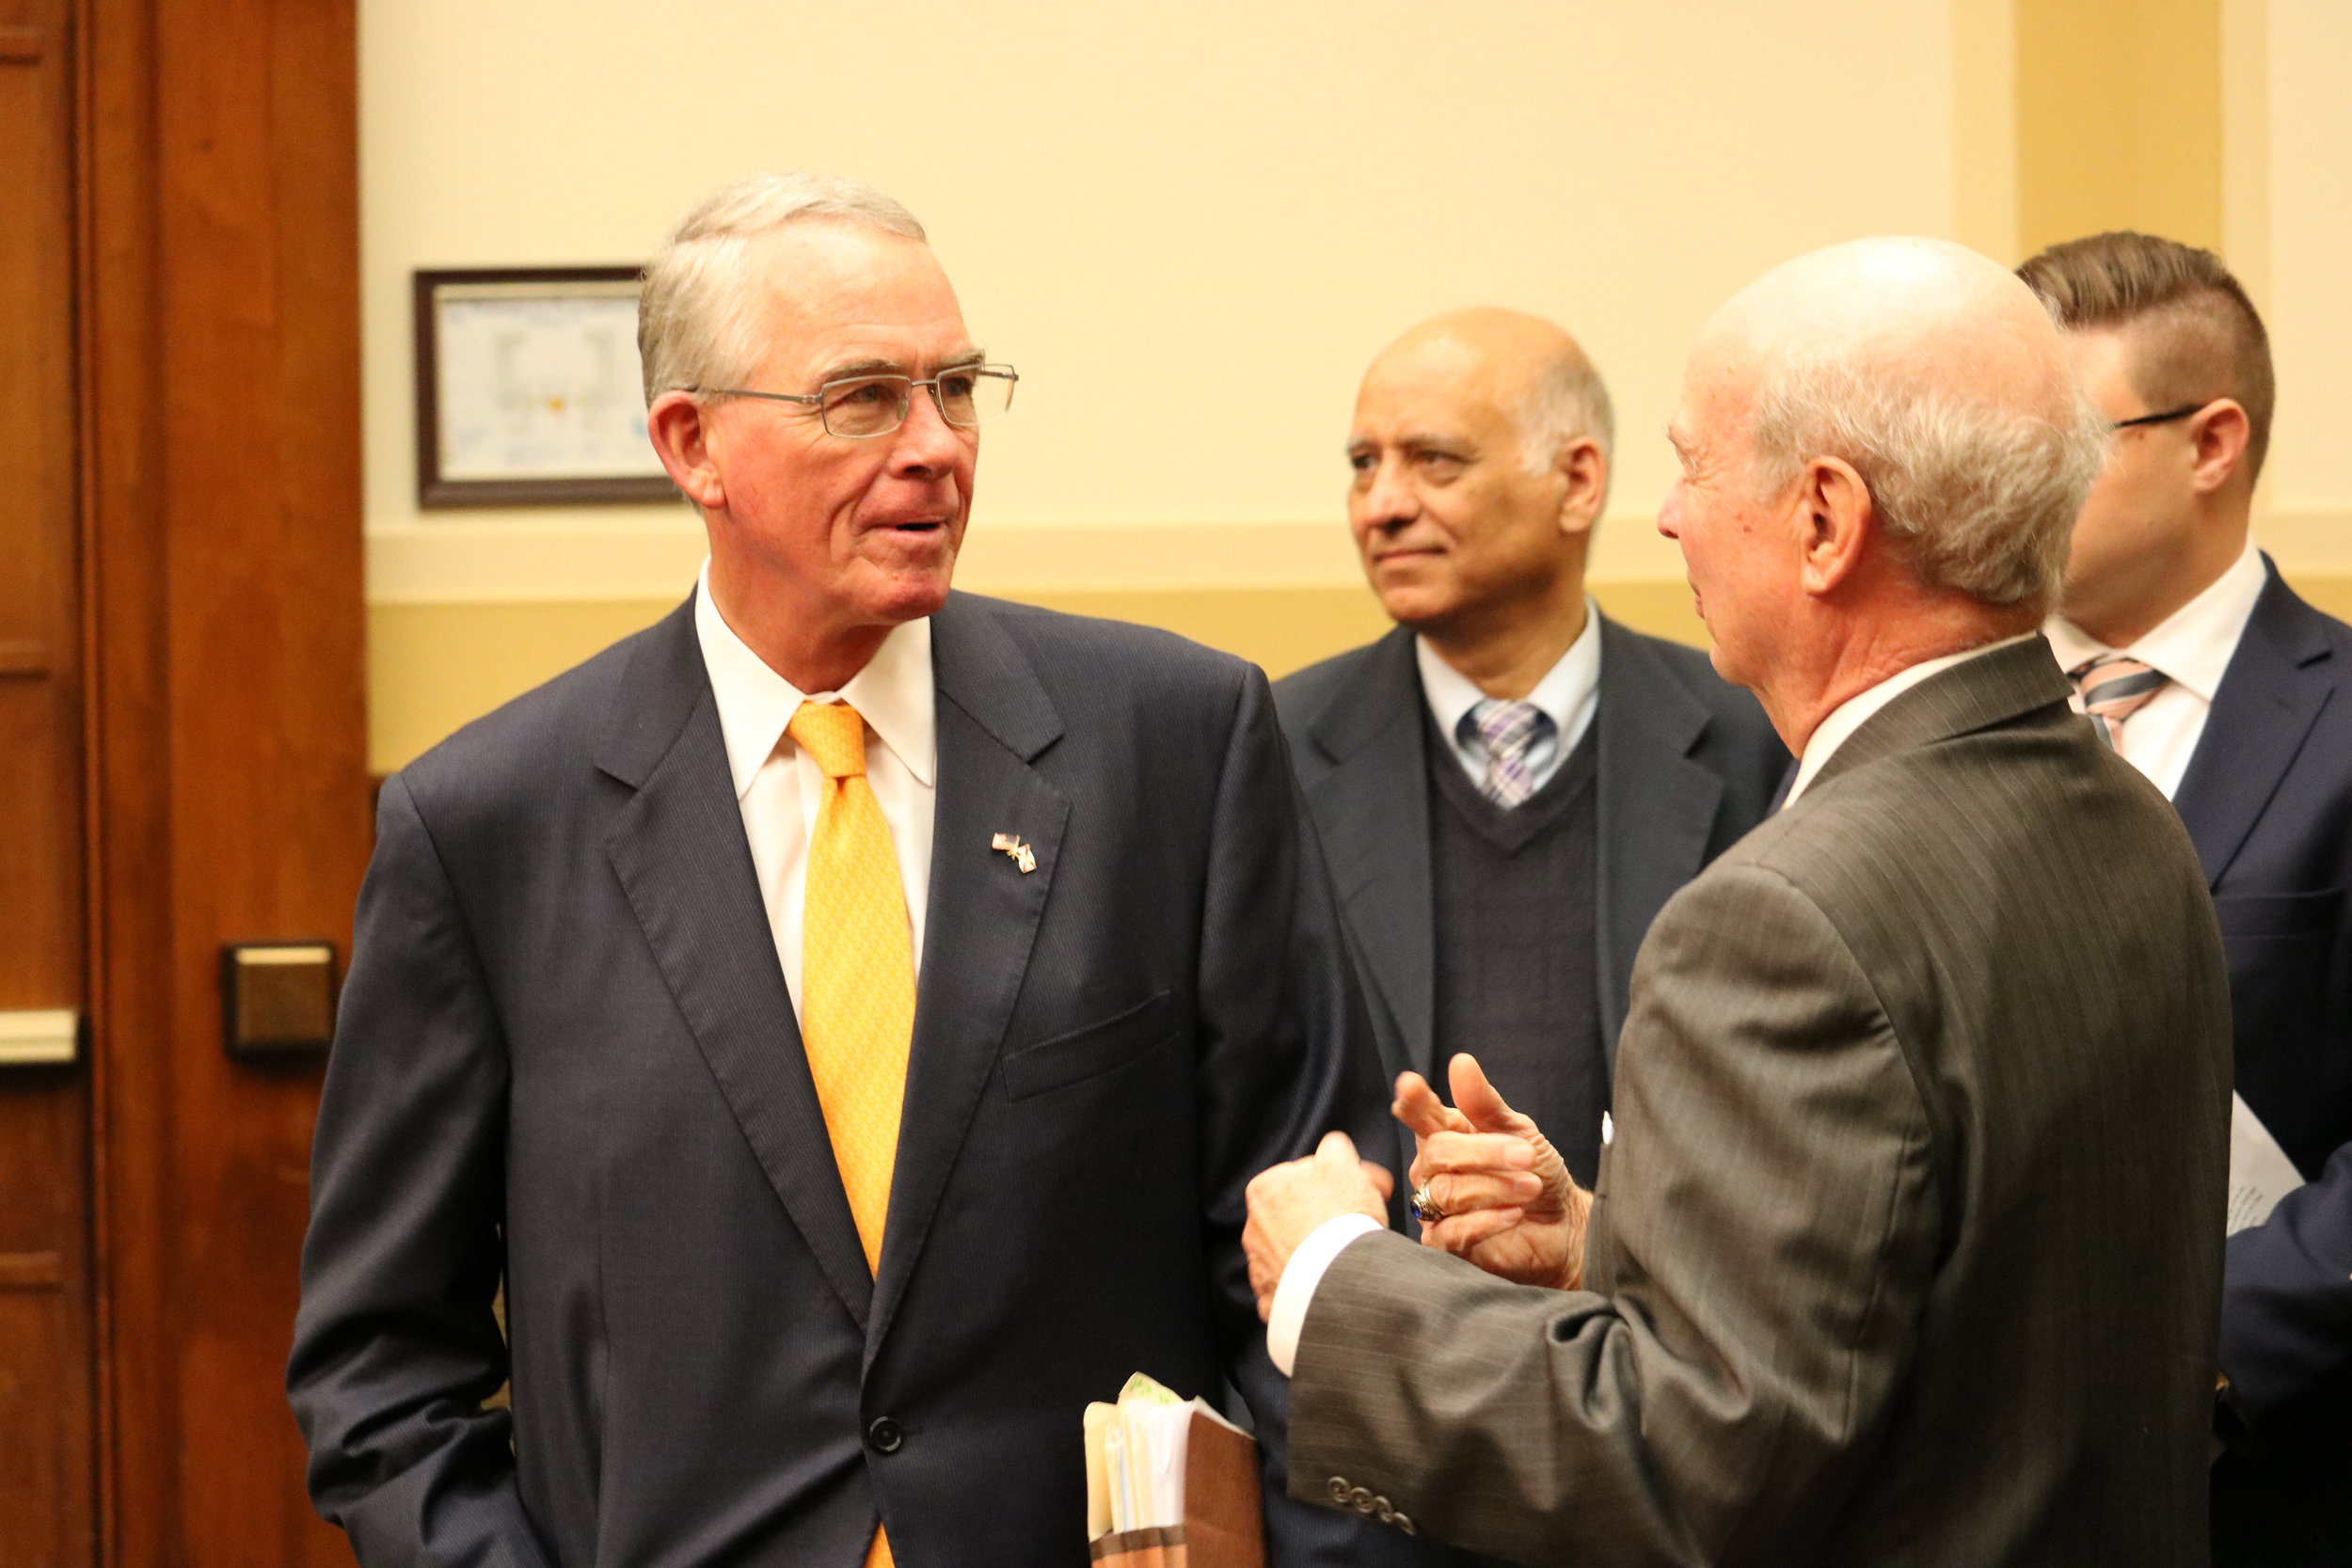 Rep. Francis Rooney (R-FL) and Mark Winter, Chairman, Religious Freedom Institute